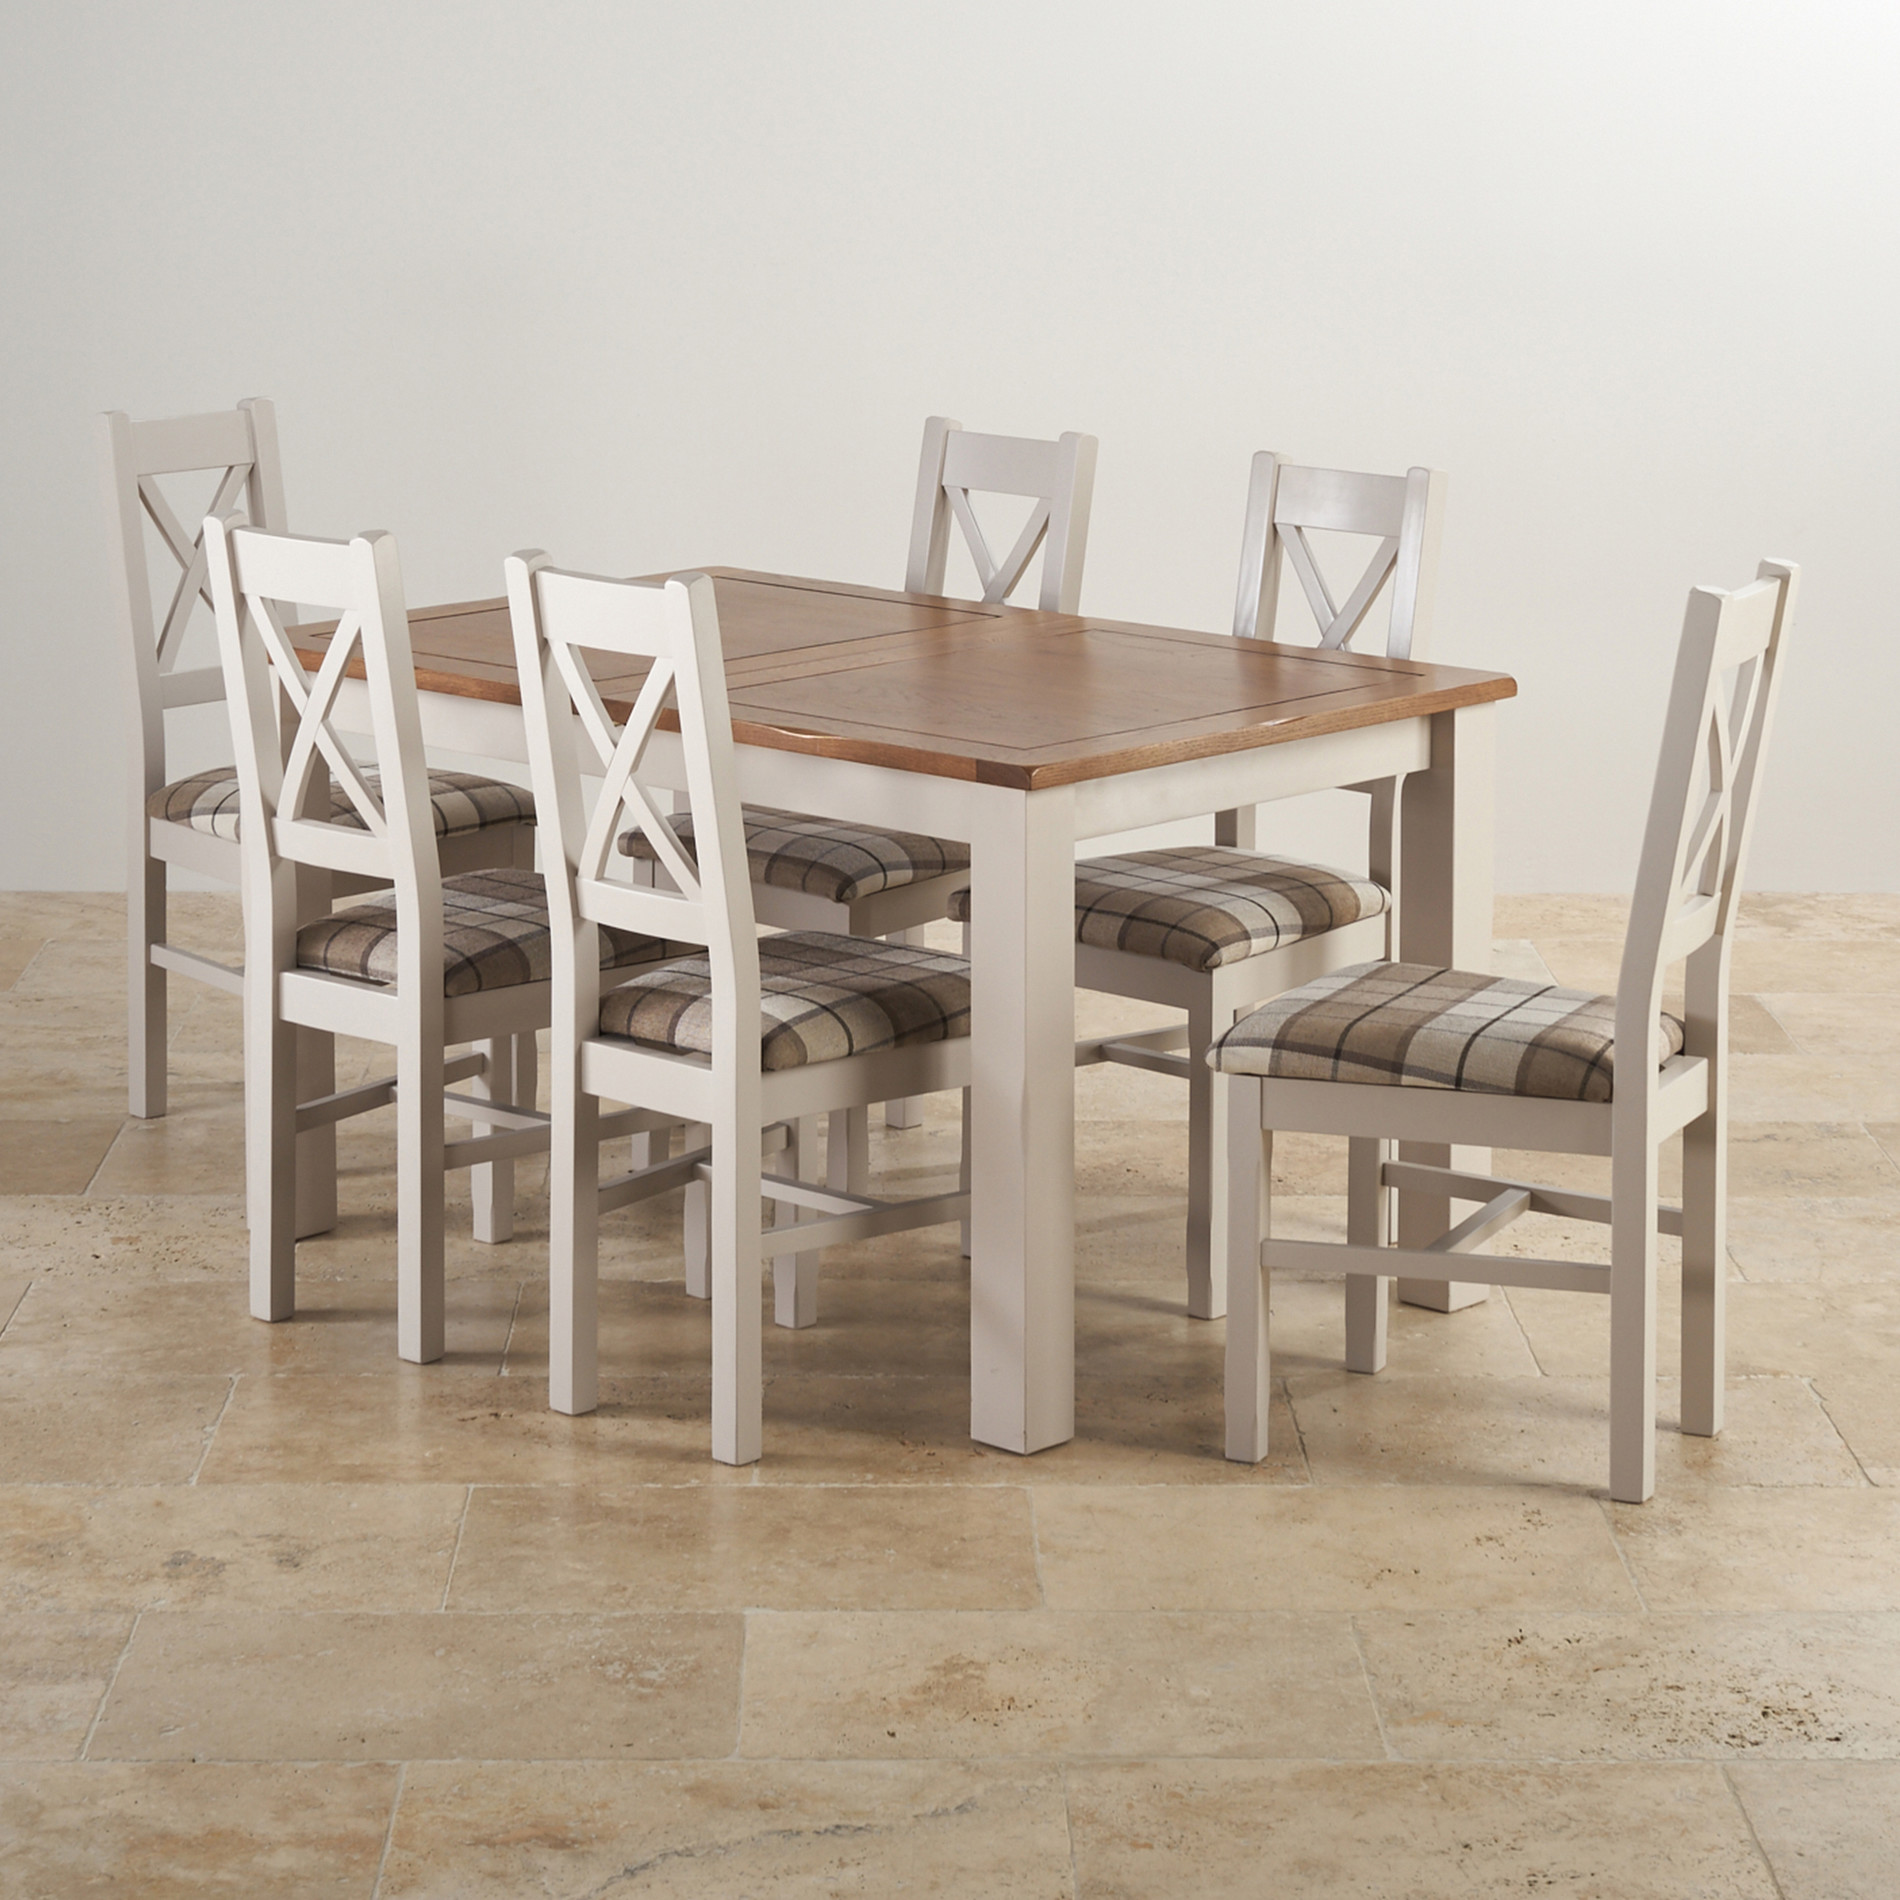 kemble rustic solid oak and painted 4ft 7 x 3ft extending dining table with 6 kemble chairs 57a8919b89cf6